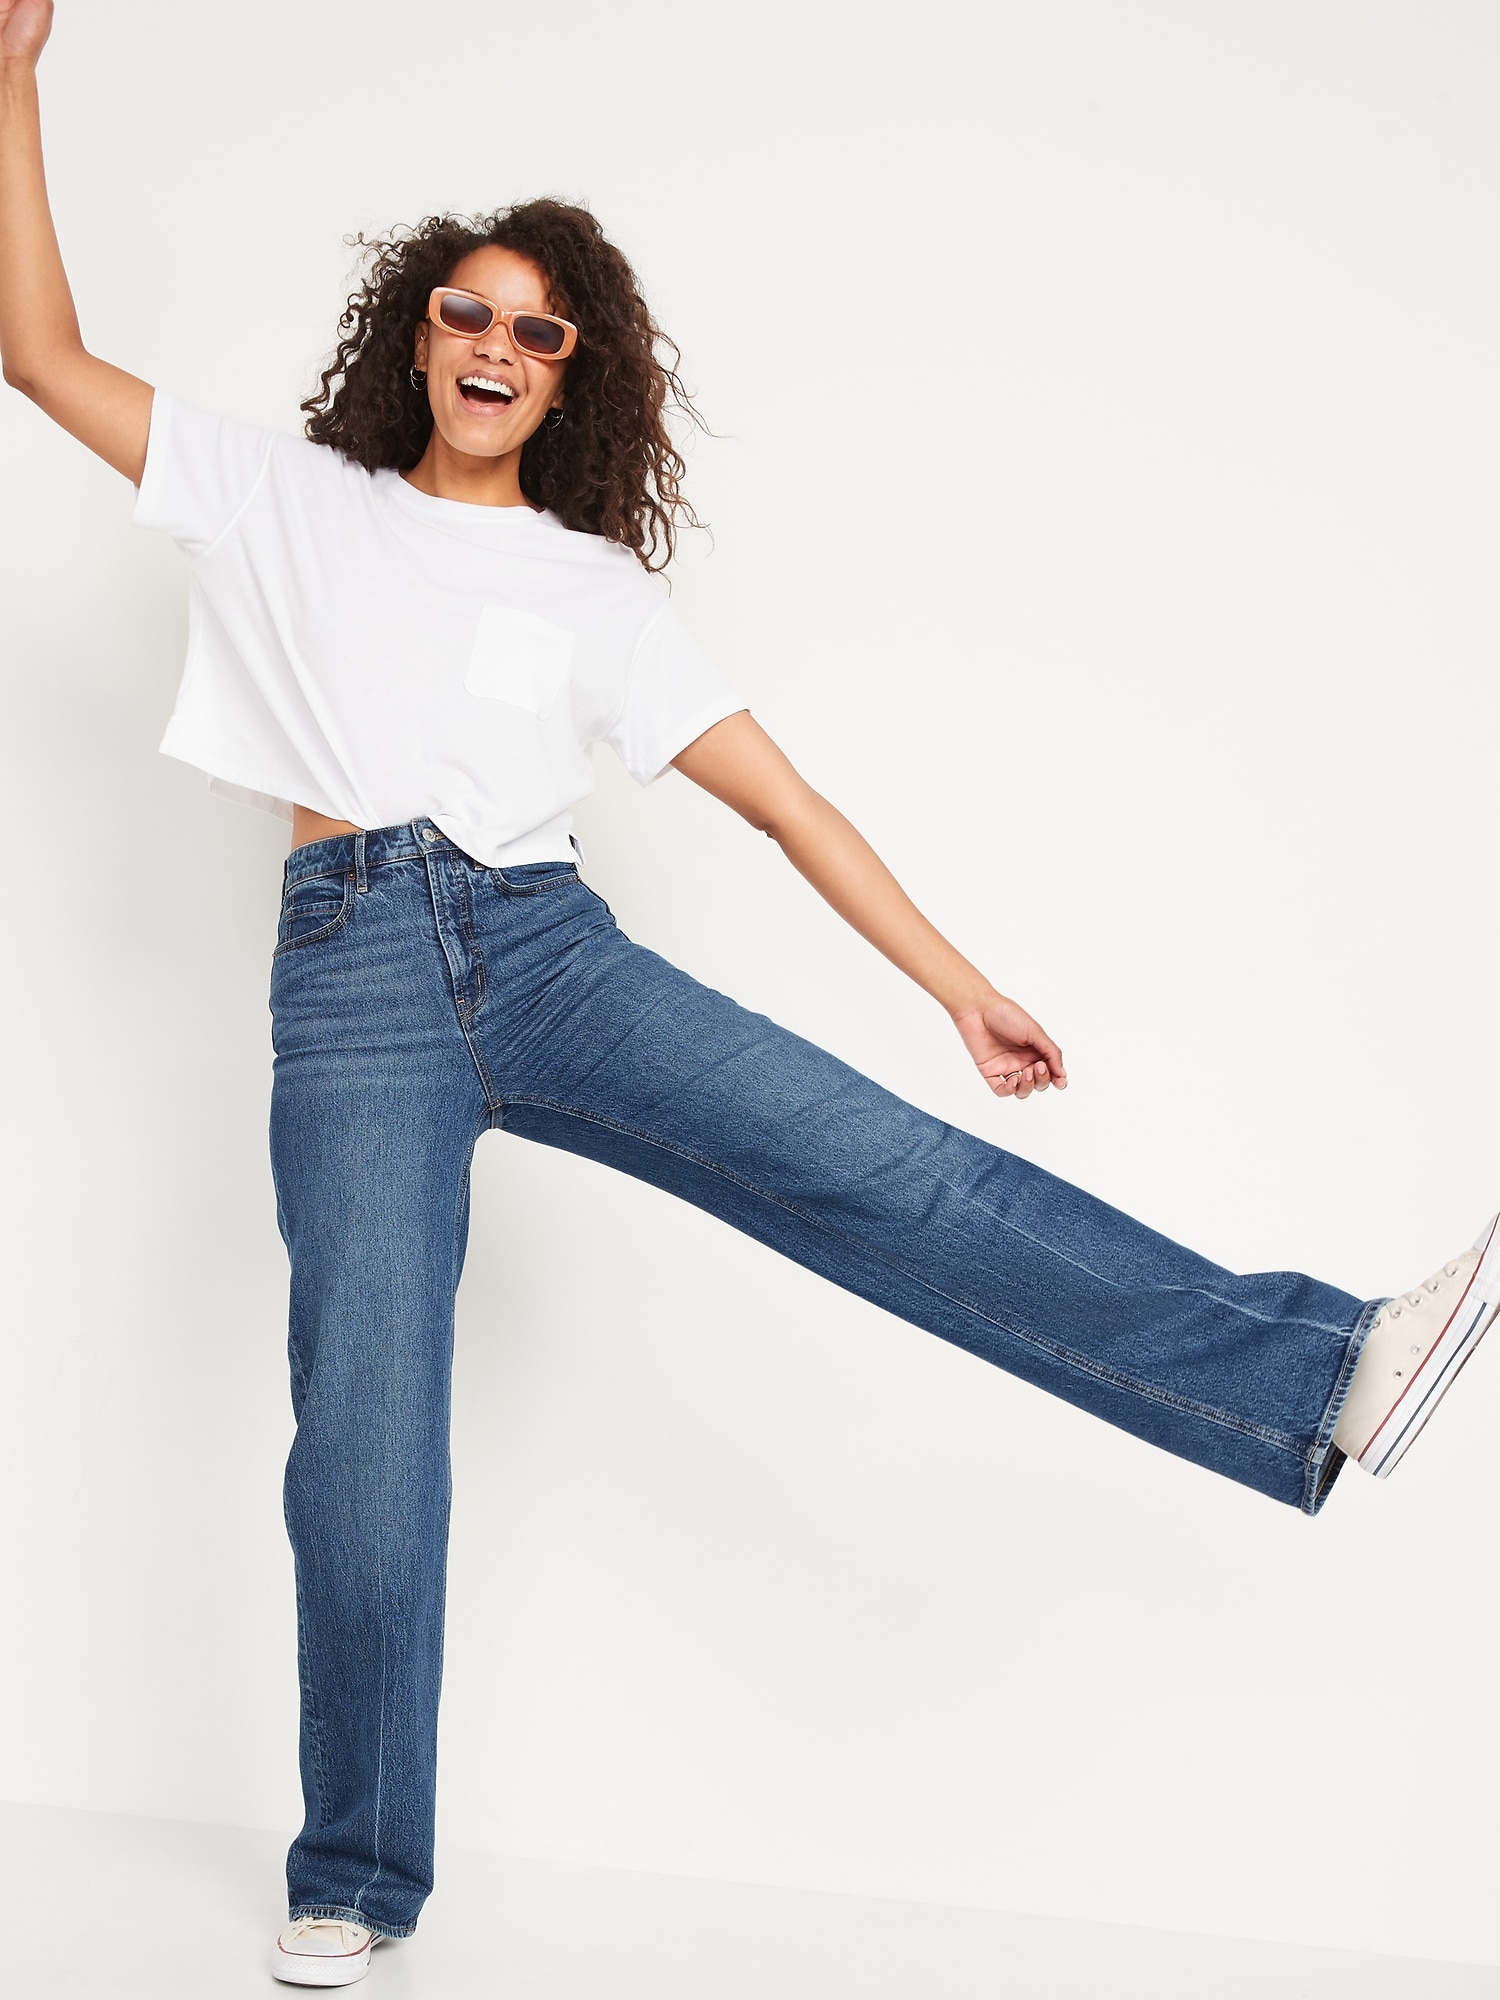 Old Navy Extra High-Waisted Flare Jeans for Women